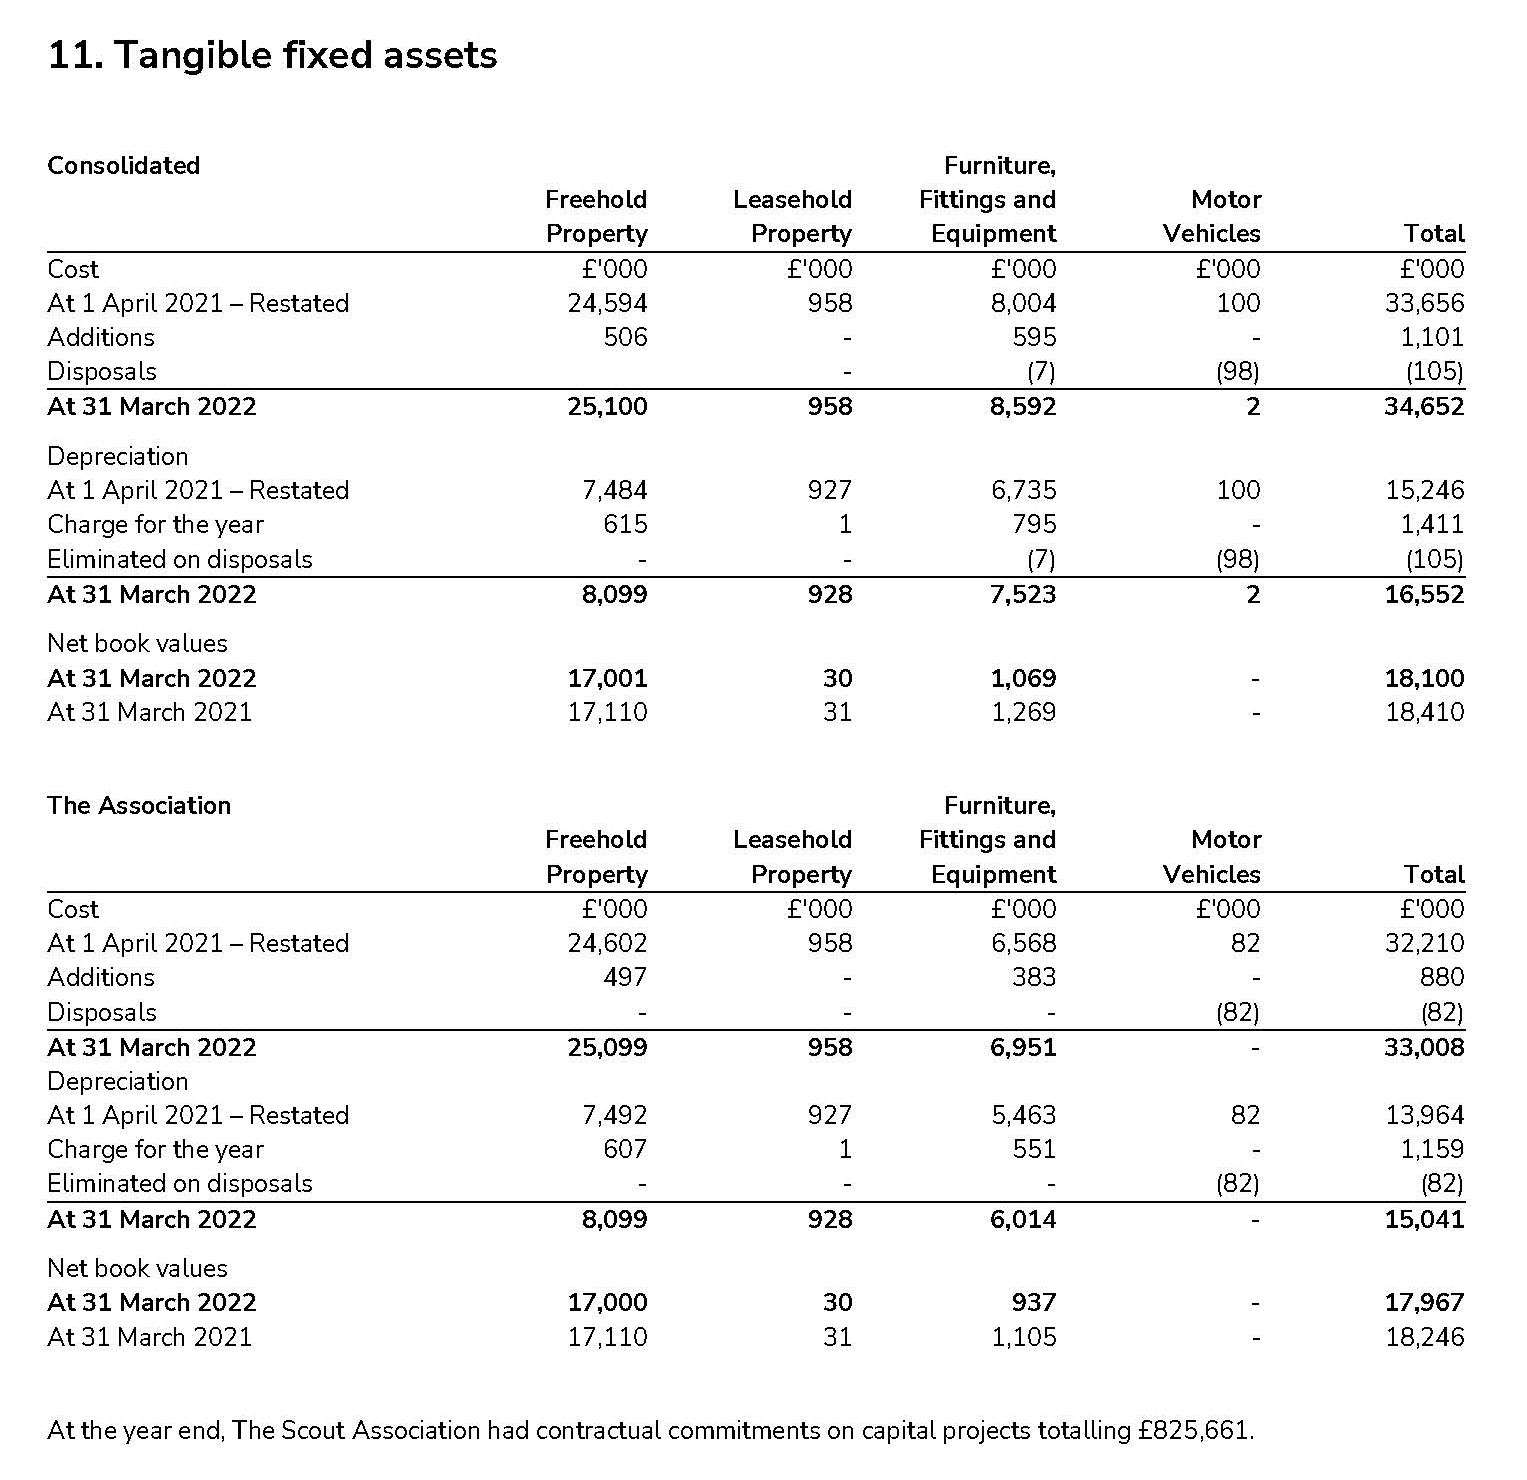 Table showing Scouts' tangible fixed assets for 2021-22